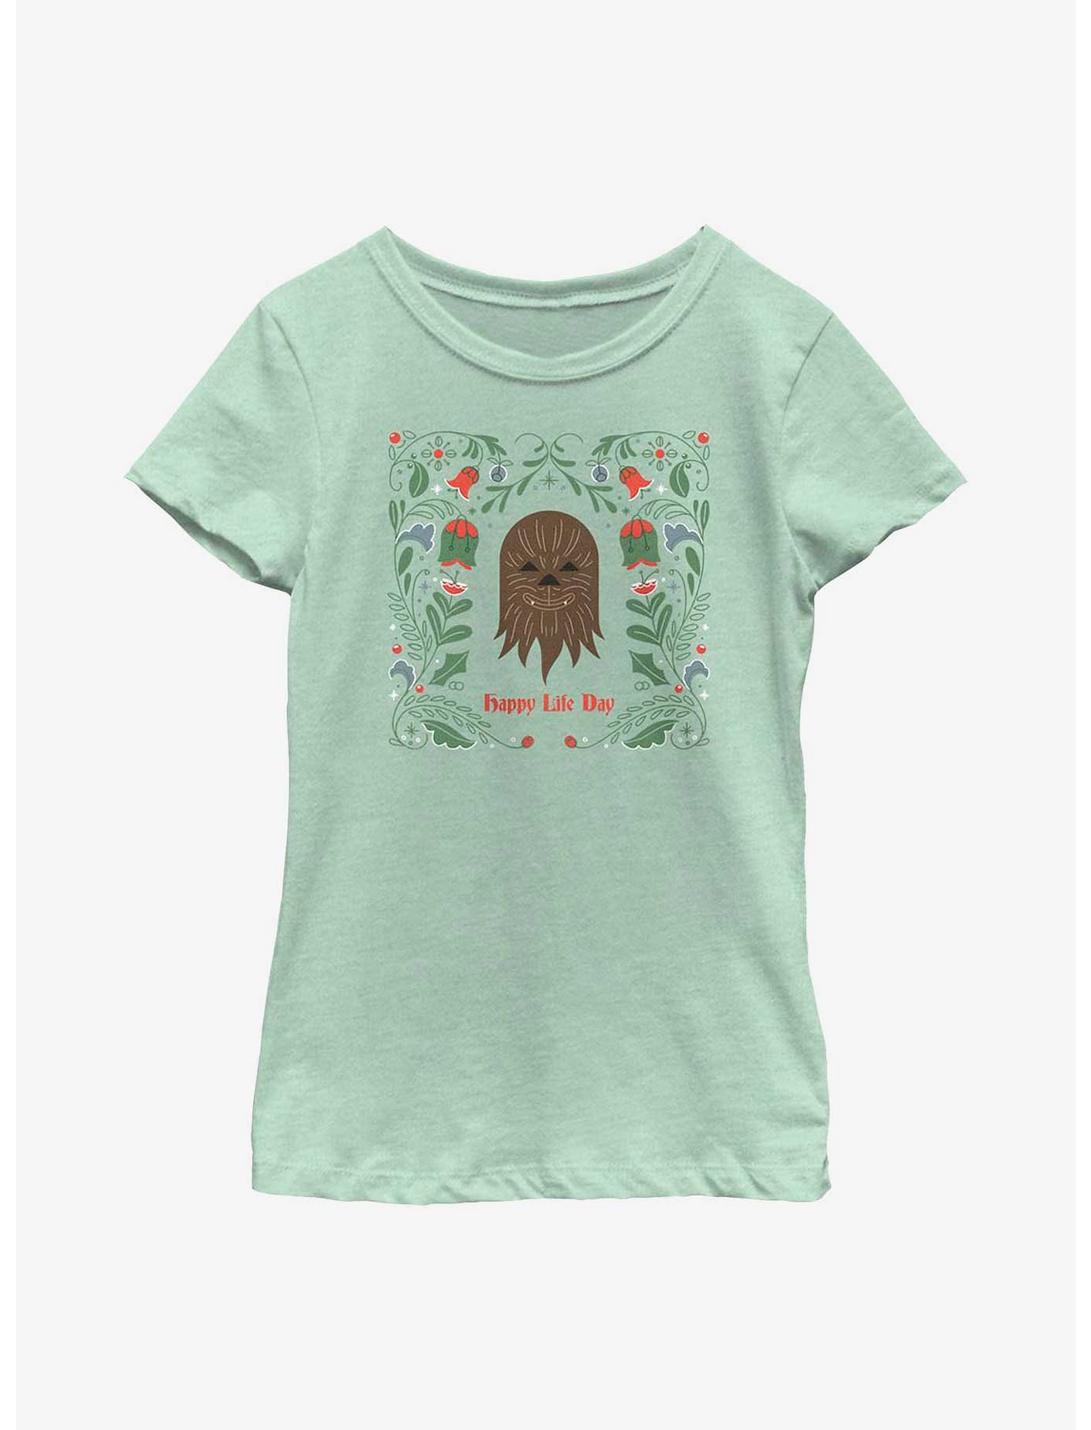 Star Wars Chewie Happy Life Day Youth Girls T-Shirt, MINT, hi-res